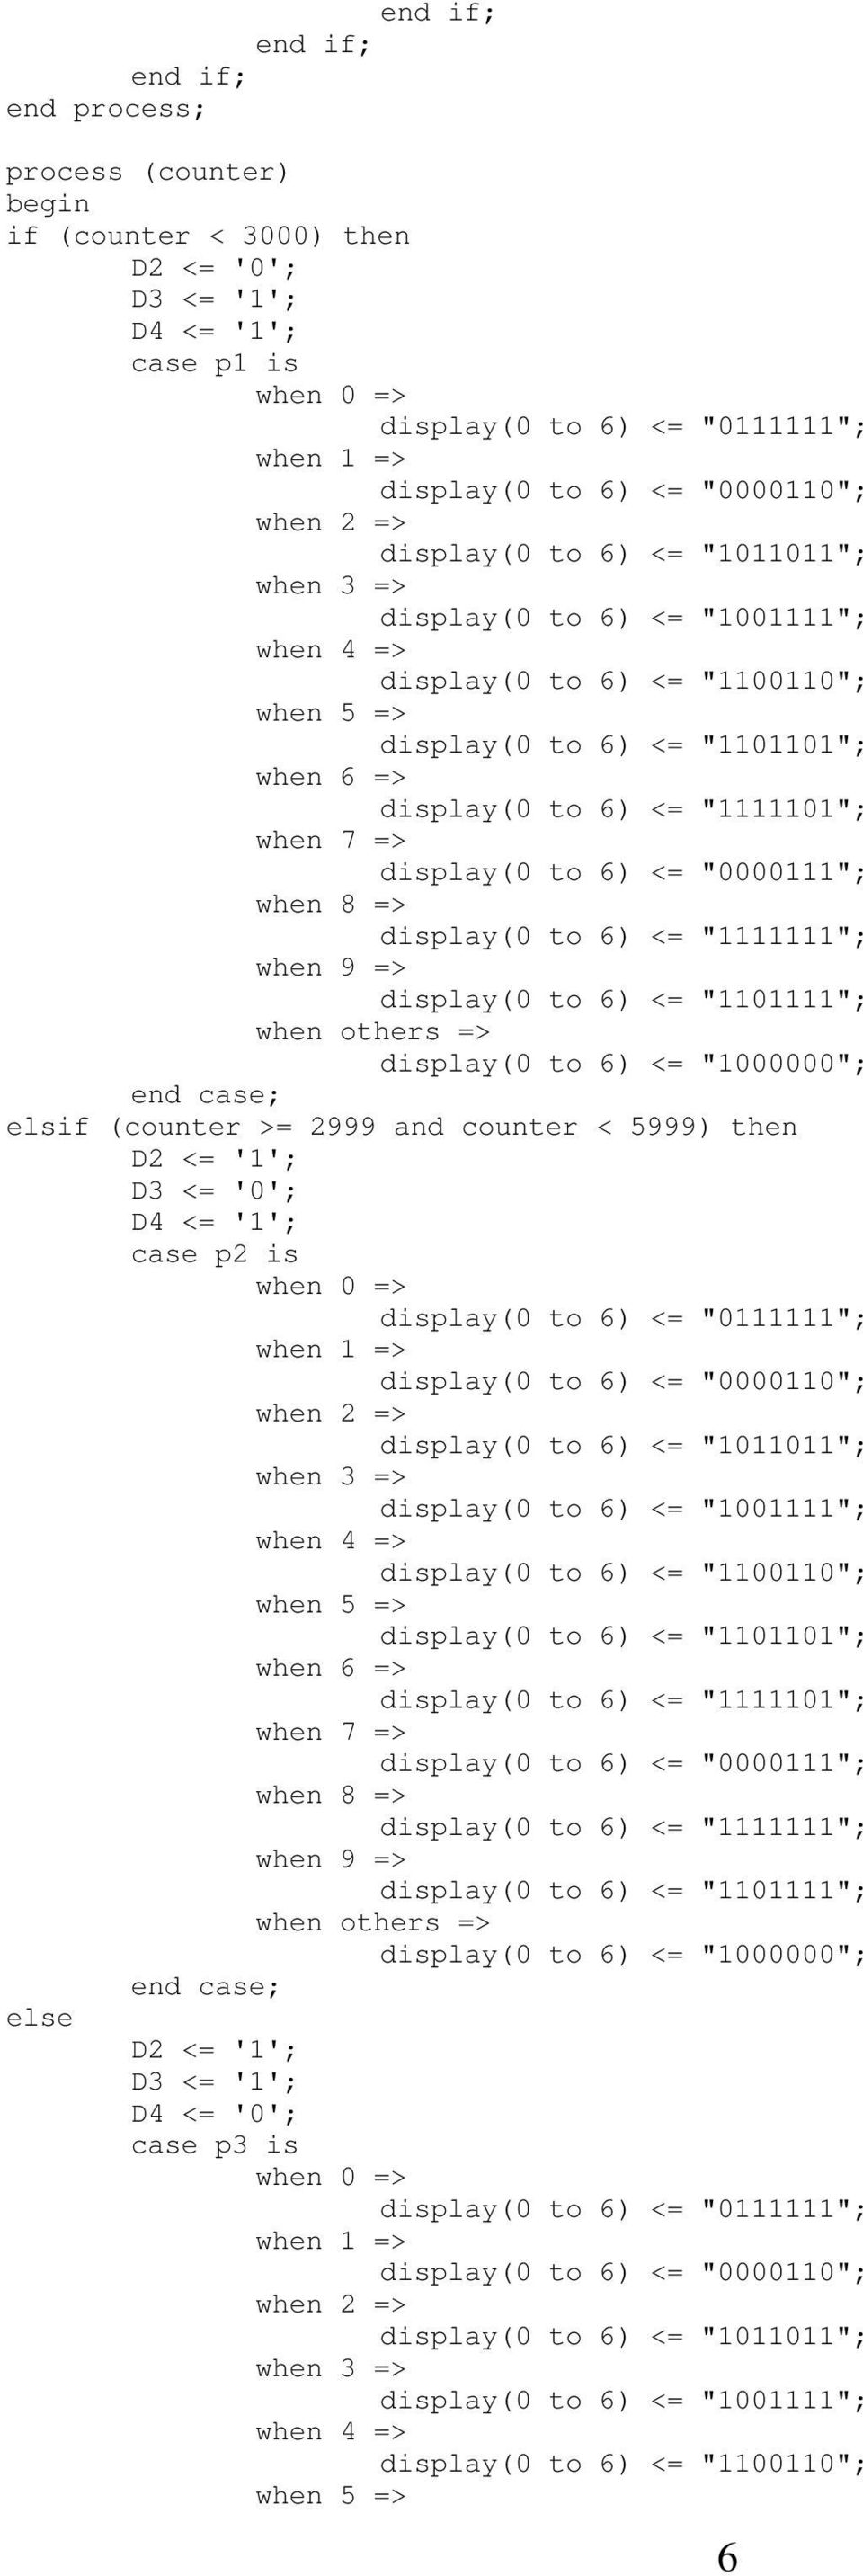 to 6) <= "0000111"; when 8 => display(0 to 6) <= "1111111"; when 9 => display(0 to 6) <= "1101111"; when others => display(0 to 6) <= "1000000"; end case; elsif (counter >= 2999 and counter < 5999)